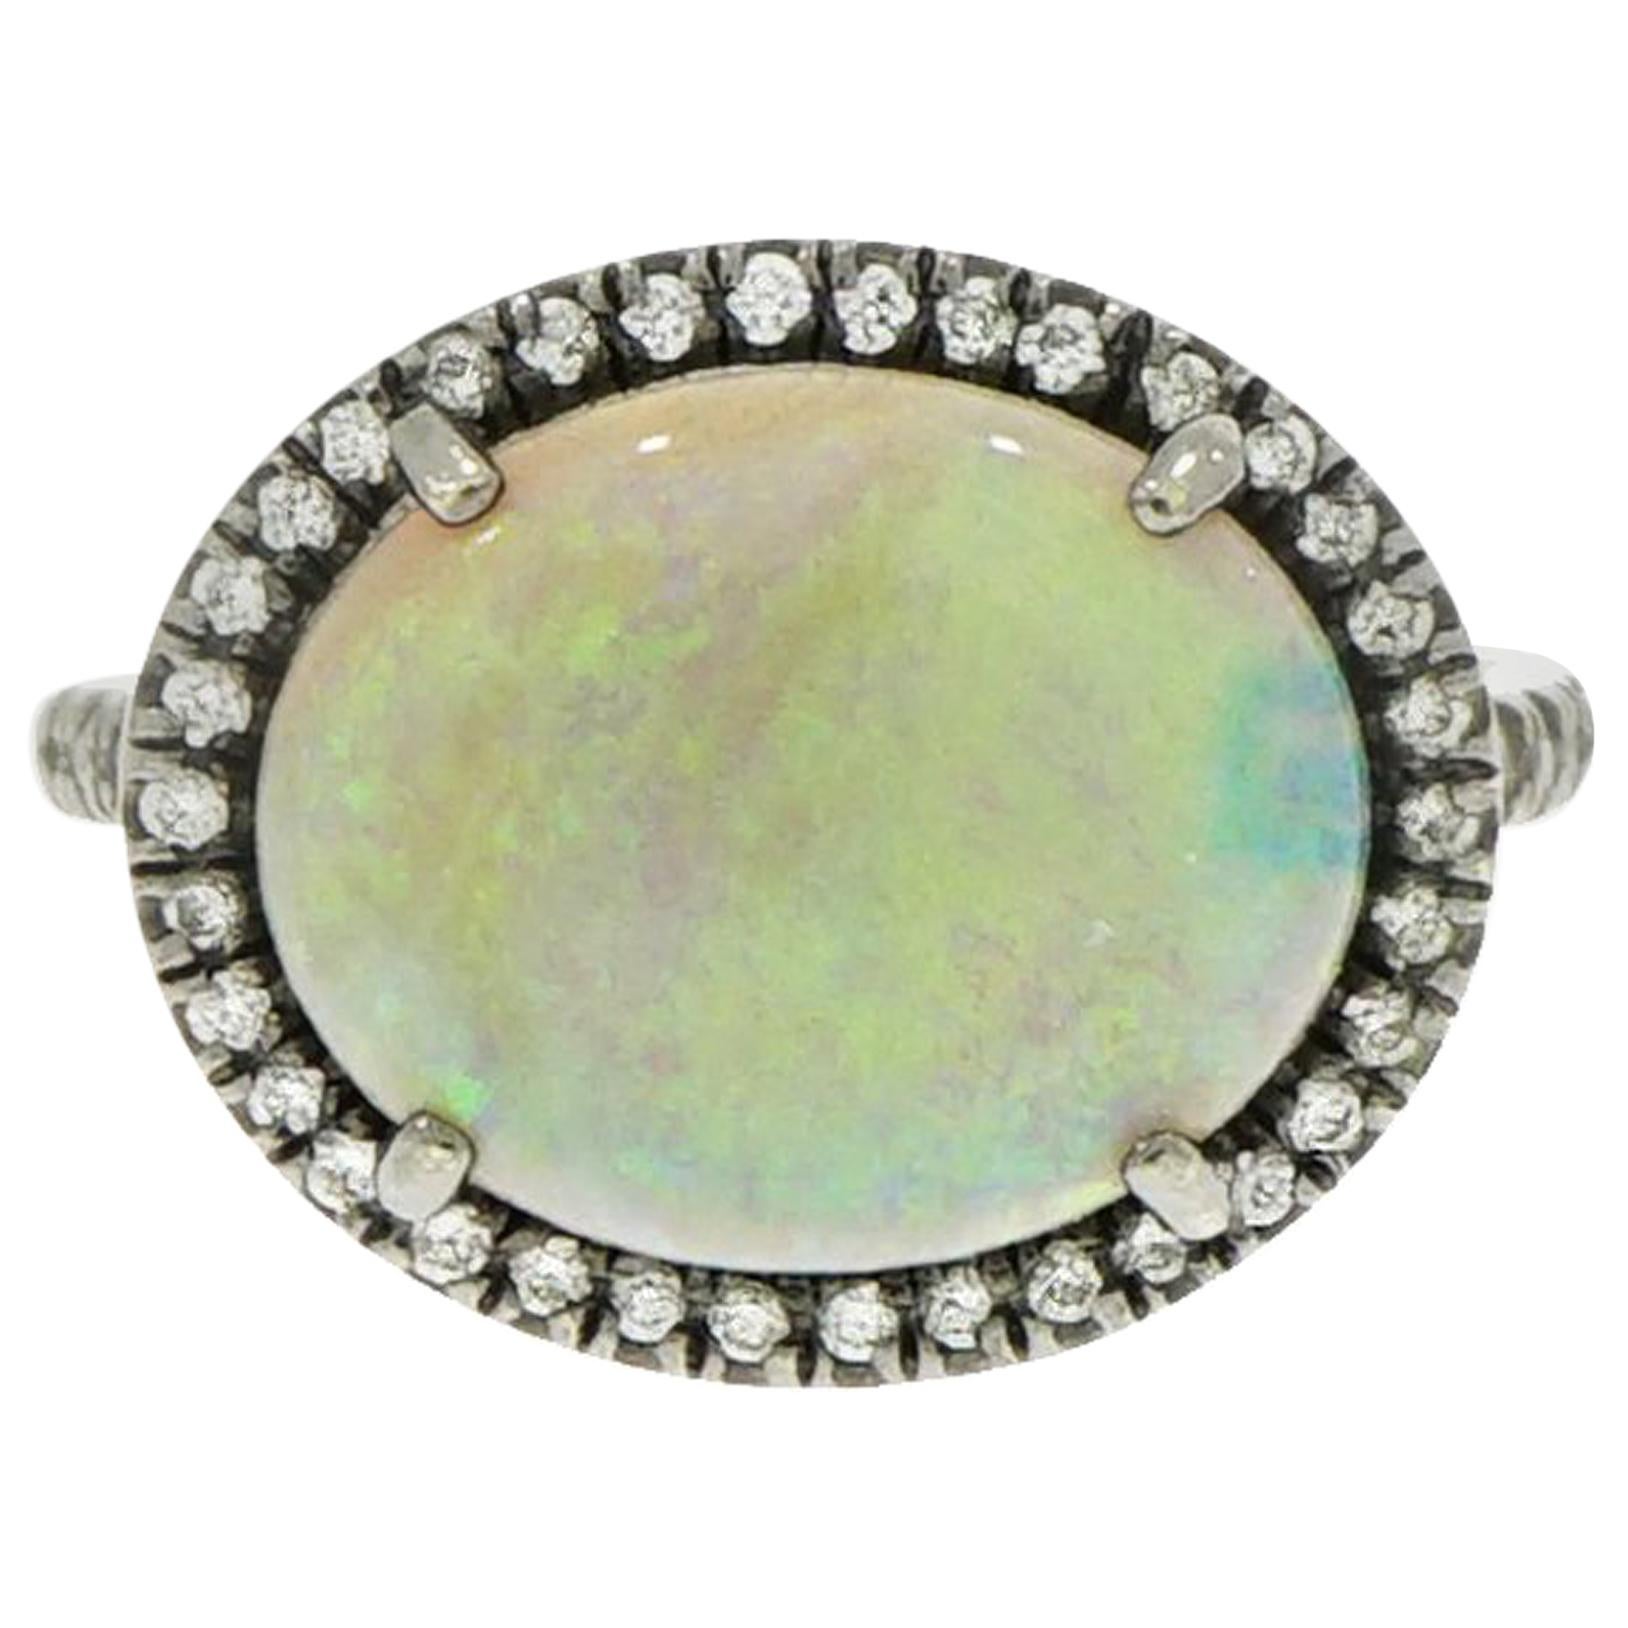 Oval Blue Opal and Diamond Ring